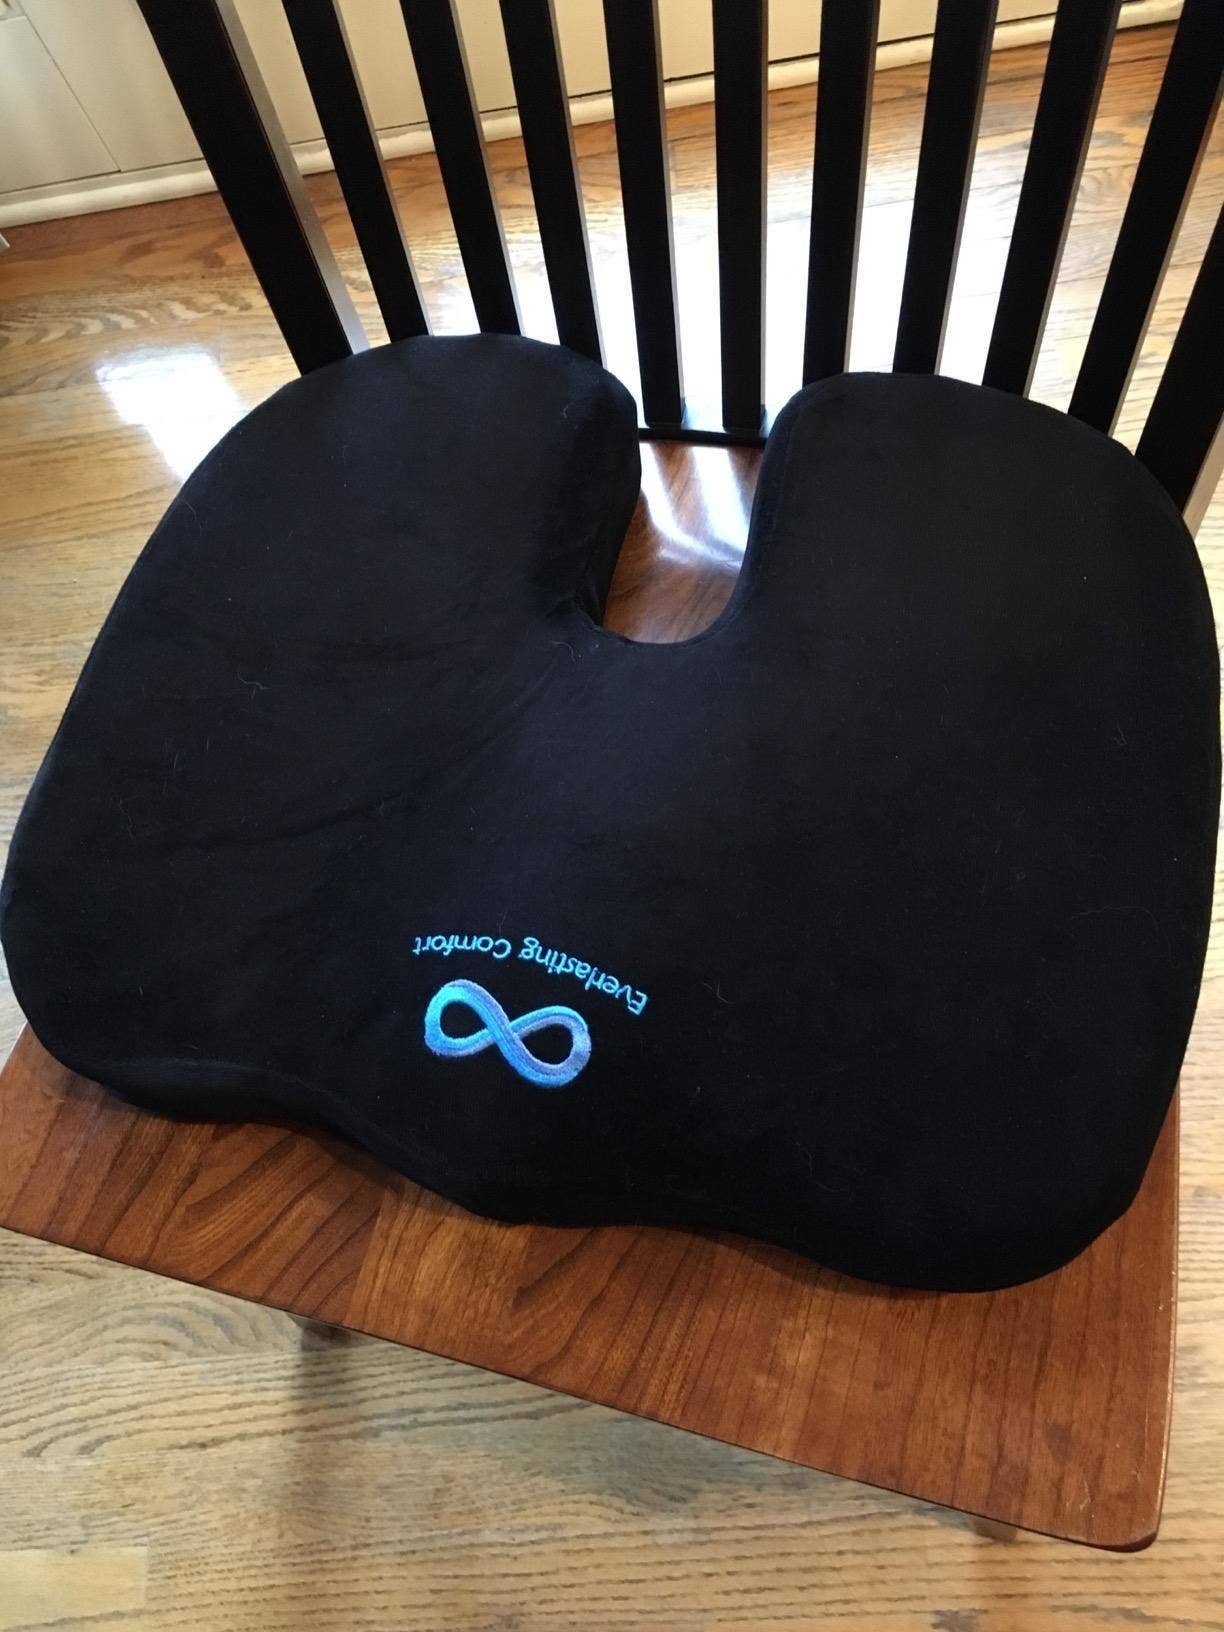 shoppers swear this seat cushion that's on sale makes sitting in airplane  seats more comfortable: 'Gave me the comfort and support I needed